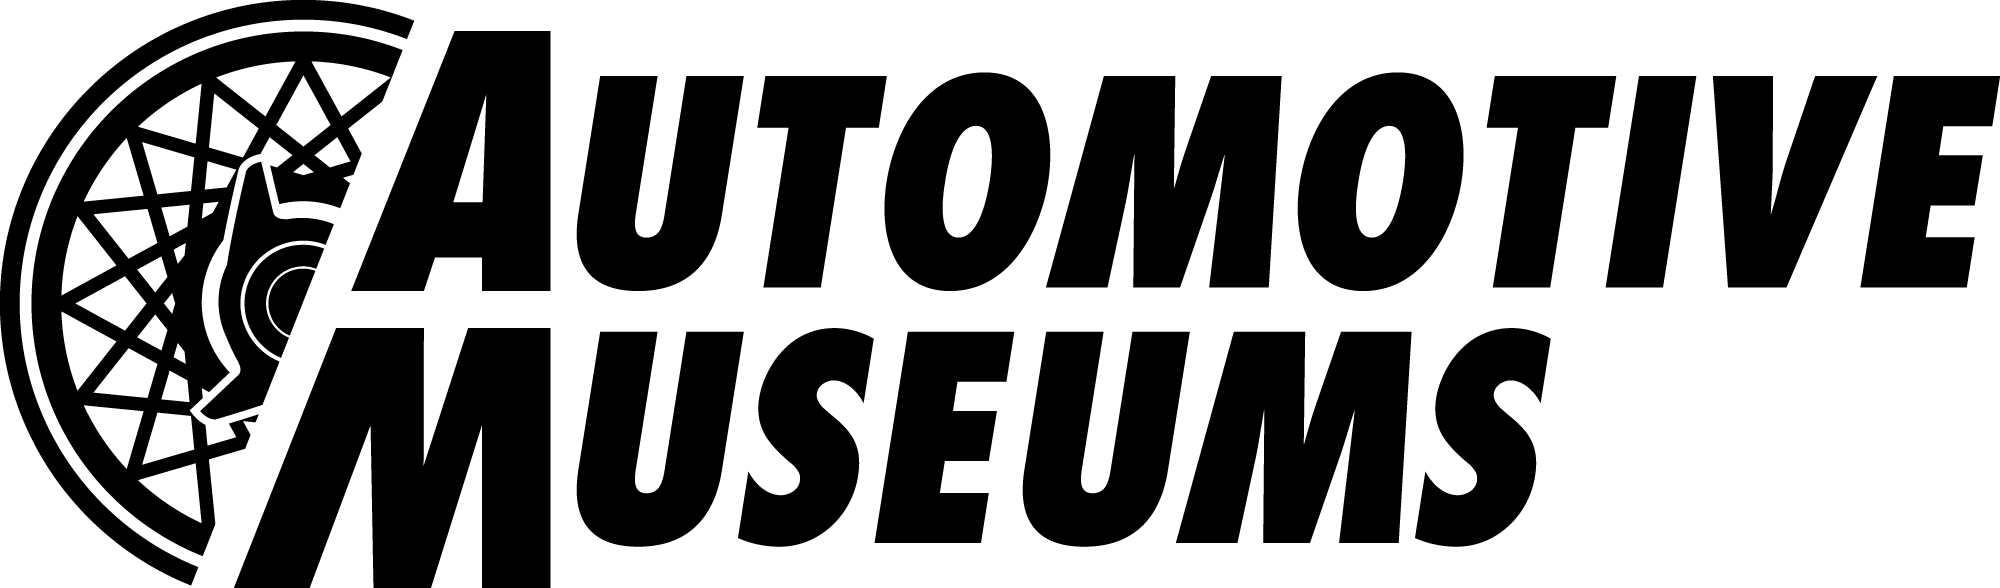 AUTOMOTIVE MUSEUMS - The most important directory of museums and collections dedicated to vehicles